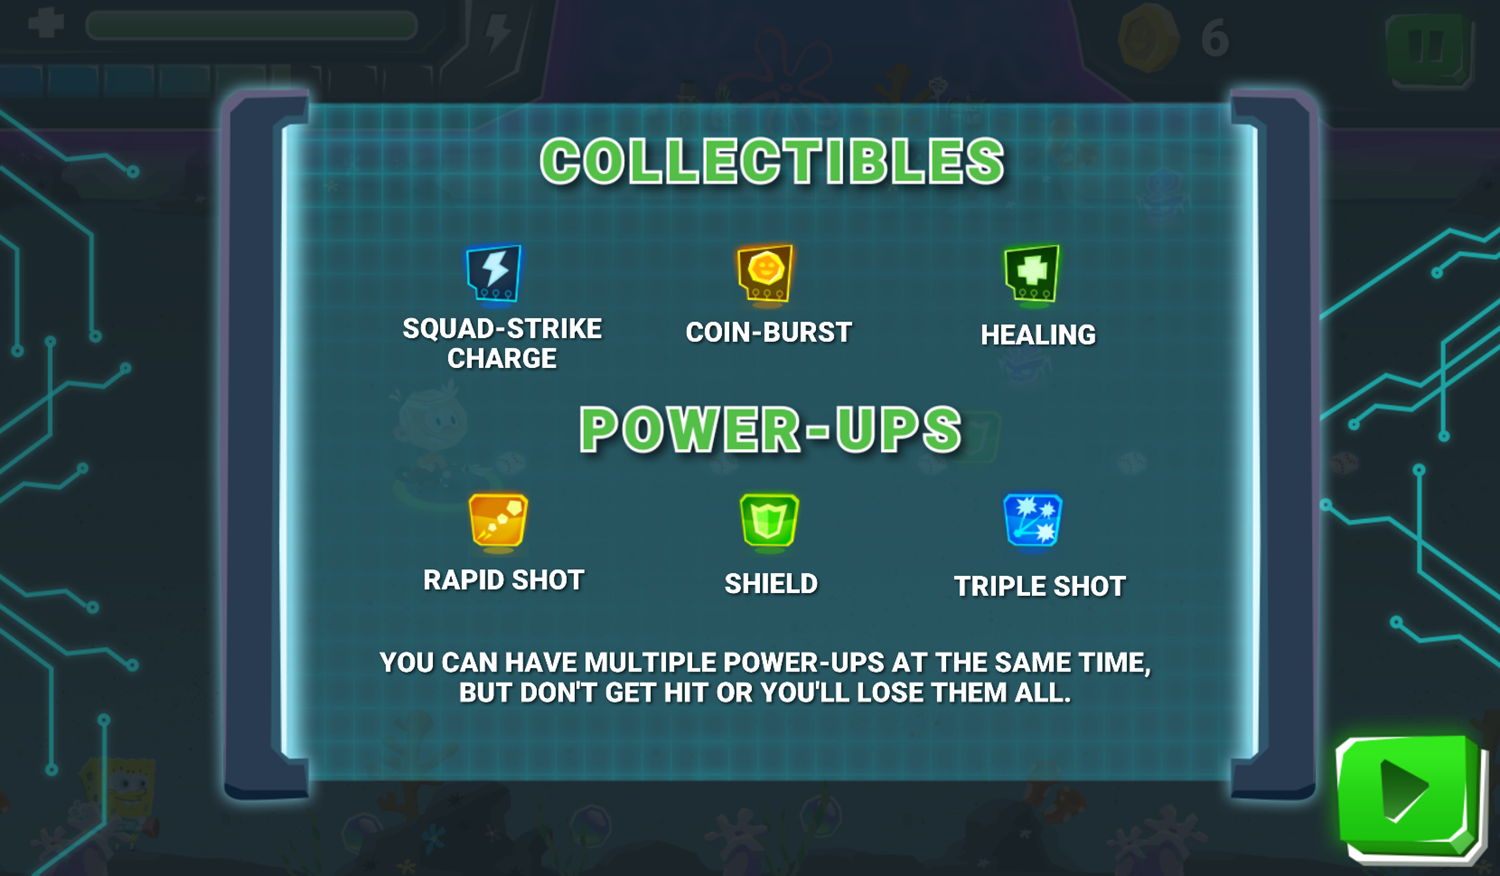 Nick Blaster Squad Game Collectibles and Power-Ups Screenshot.